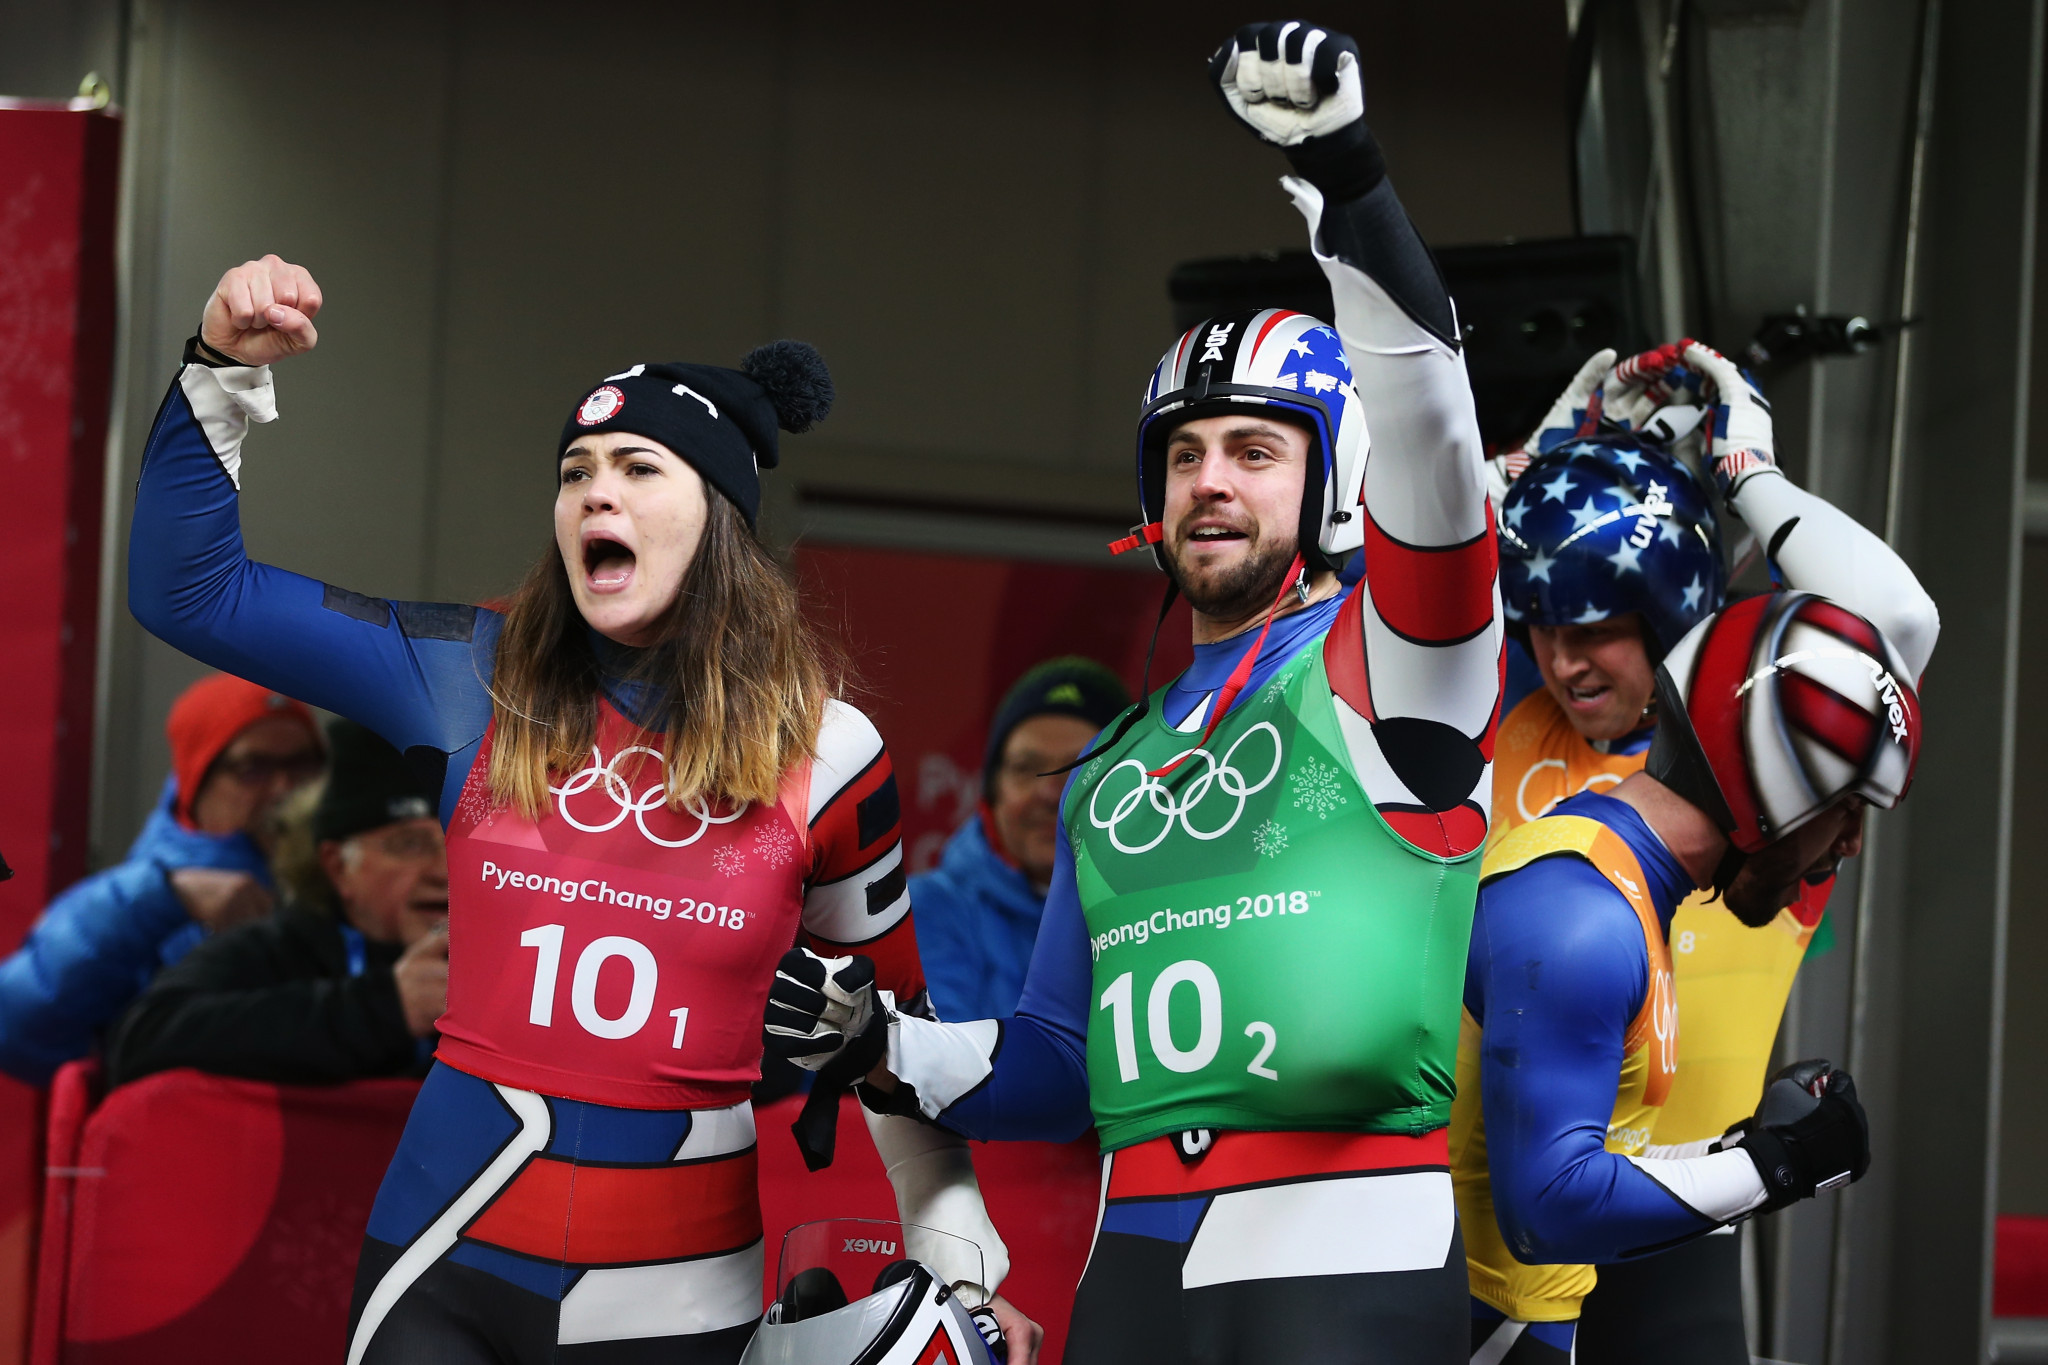 USA Luge have named Chris Mazdzer as Male Athlete of the Year and Summer Britcher as Female Athlete of the Year ©Getty Images